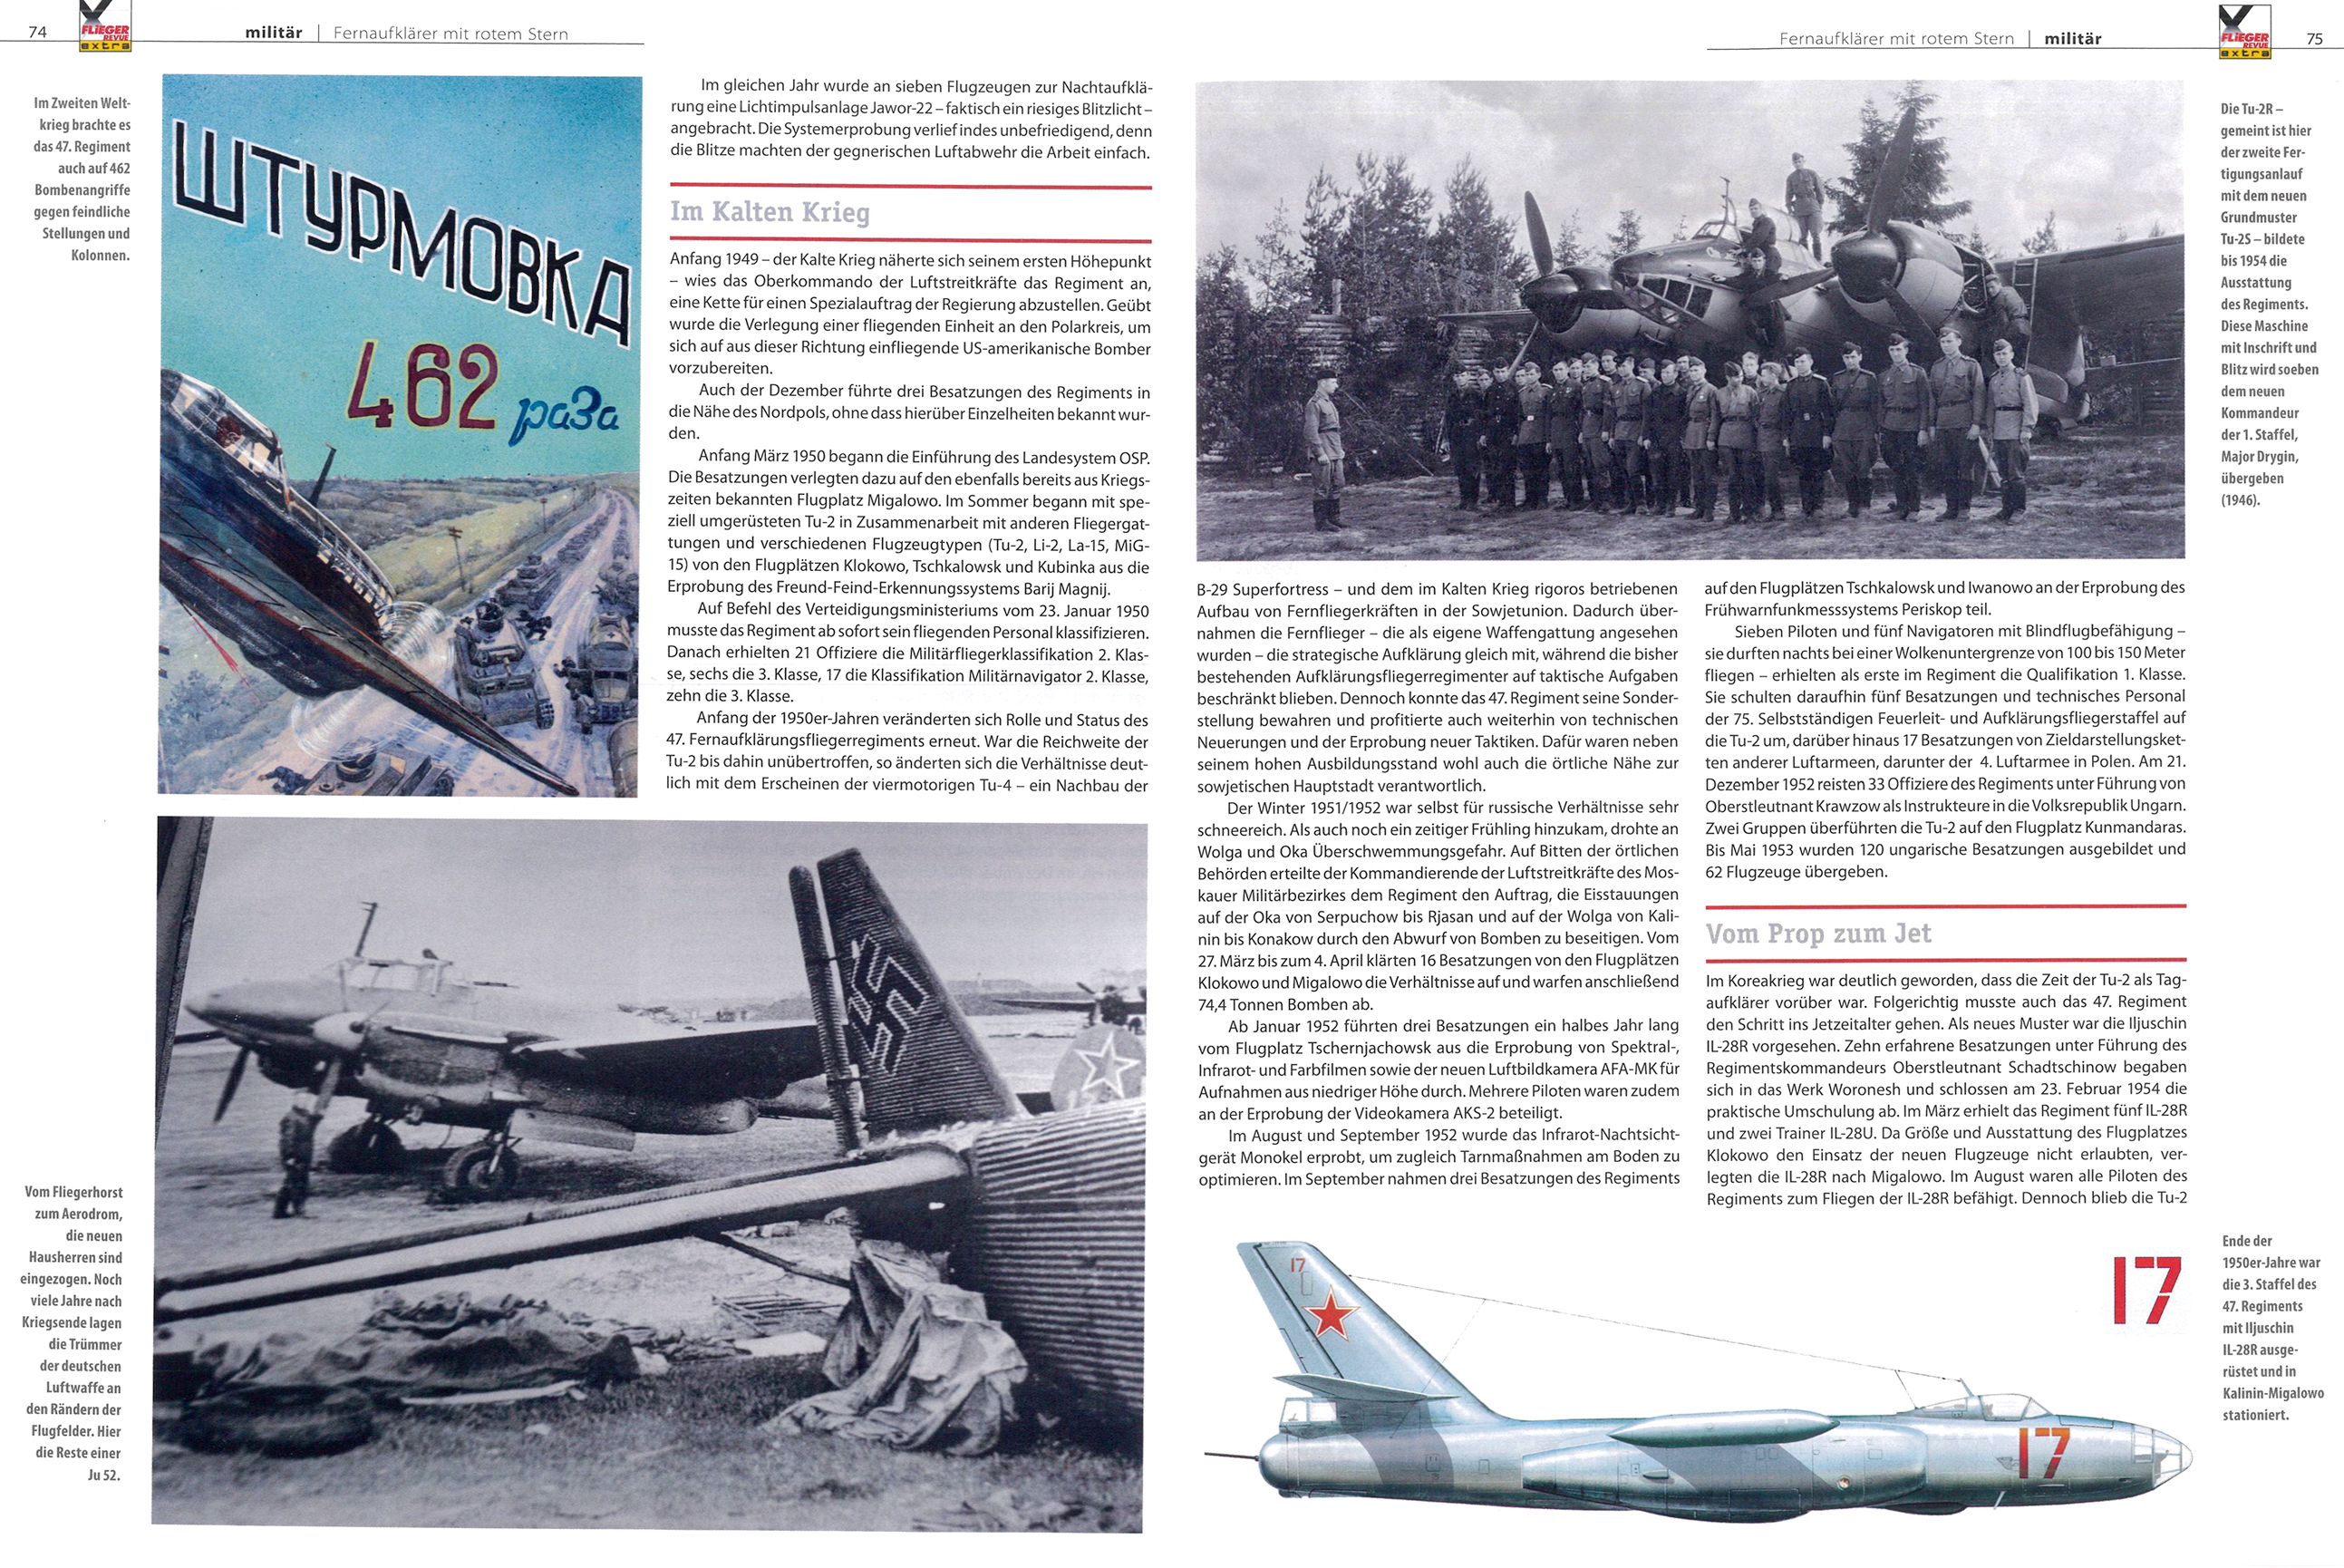 Article from German aviation magazine Flieger Revue extra 30 page 74 75